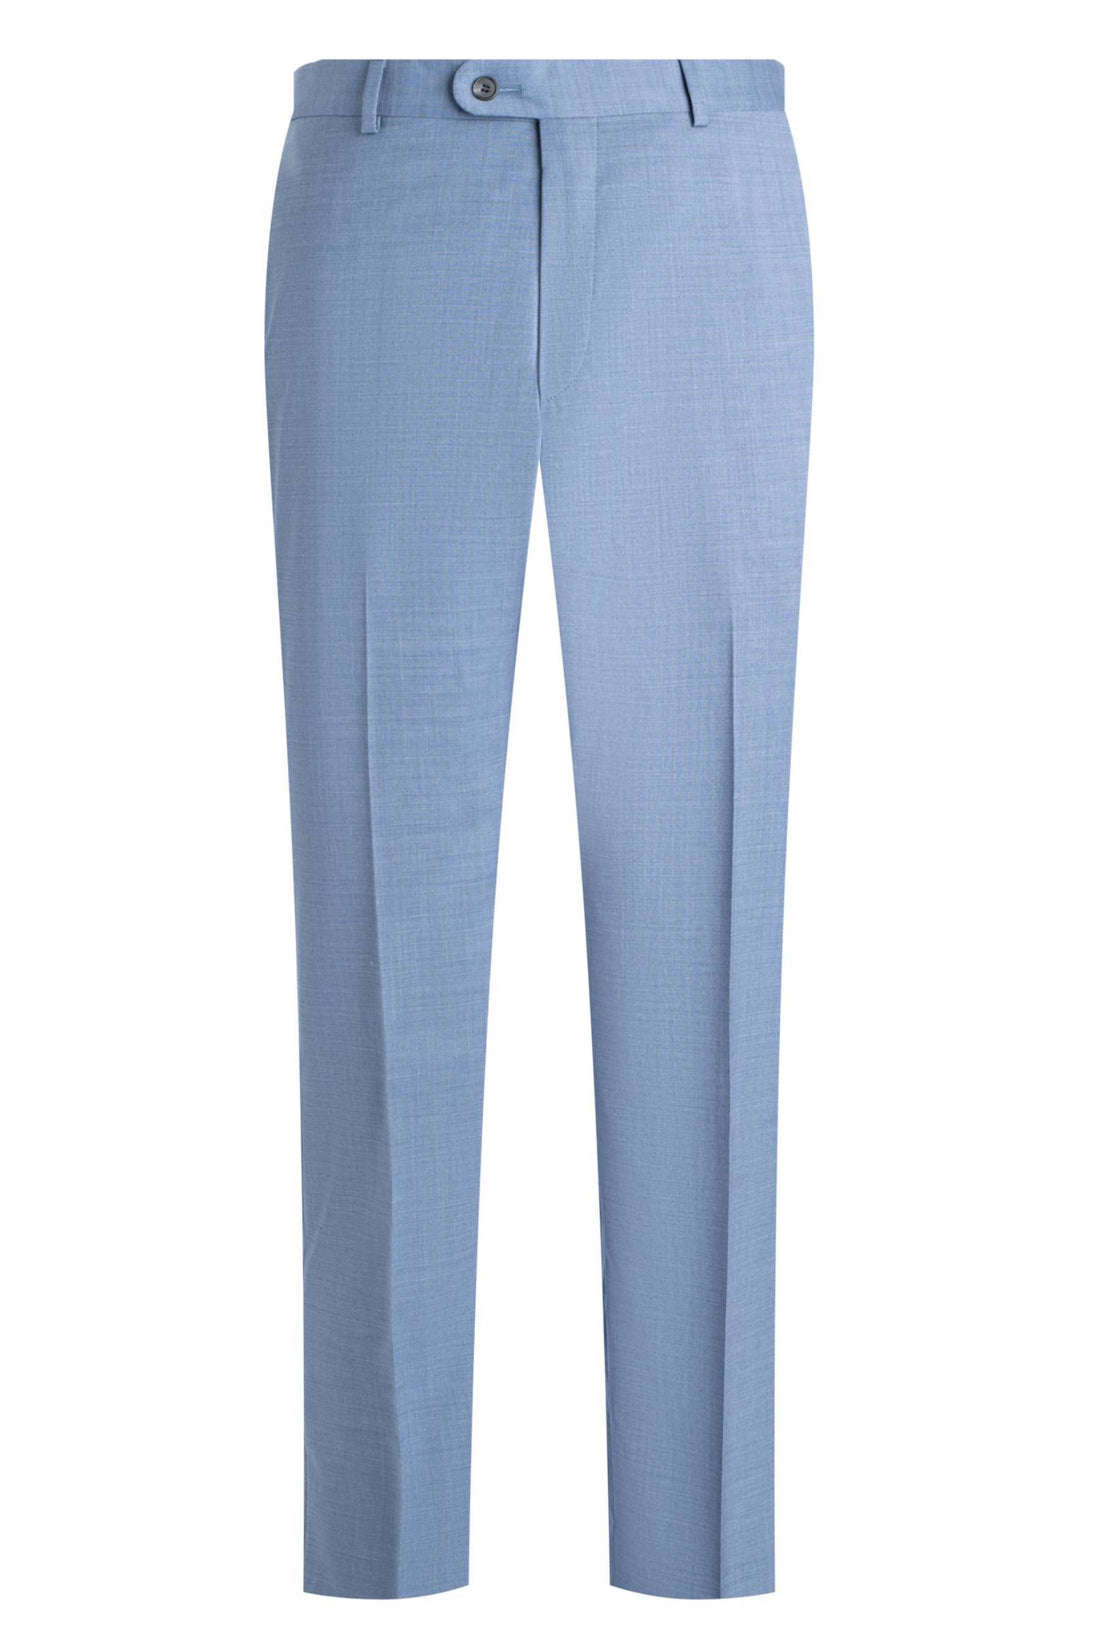 Heritage Gold Light Blue Tropical Wool Suit front Pant